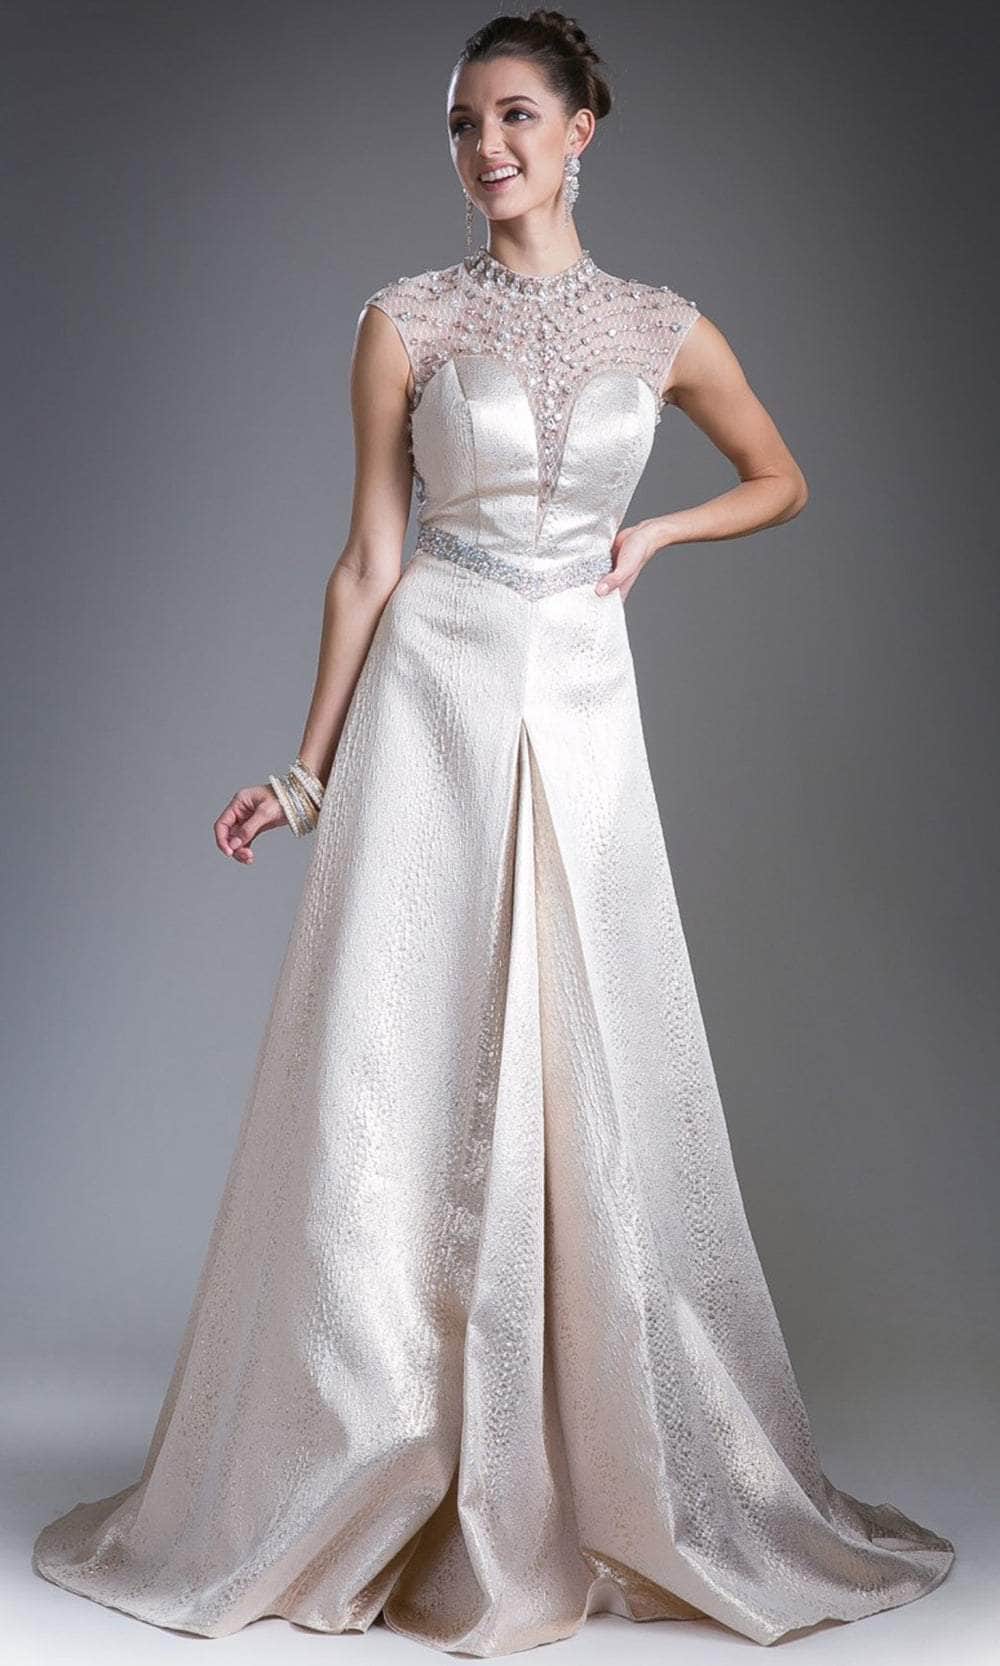 Image of Cinderella Divine 13557 - Illusion High Neck A-Line Gown